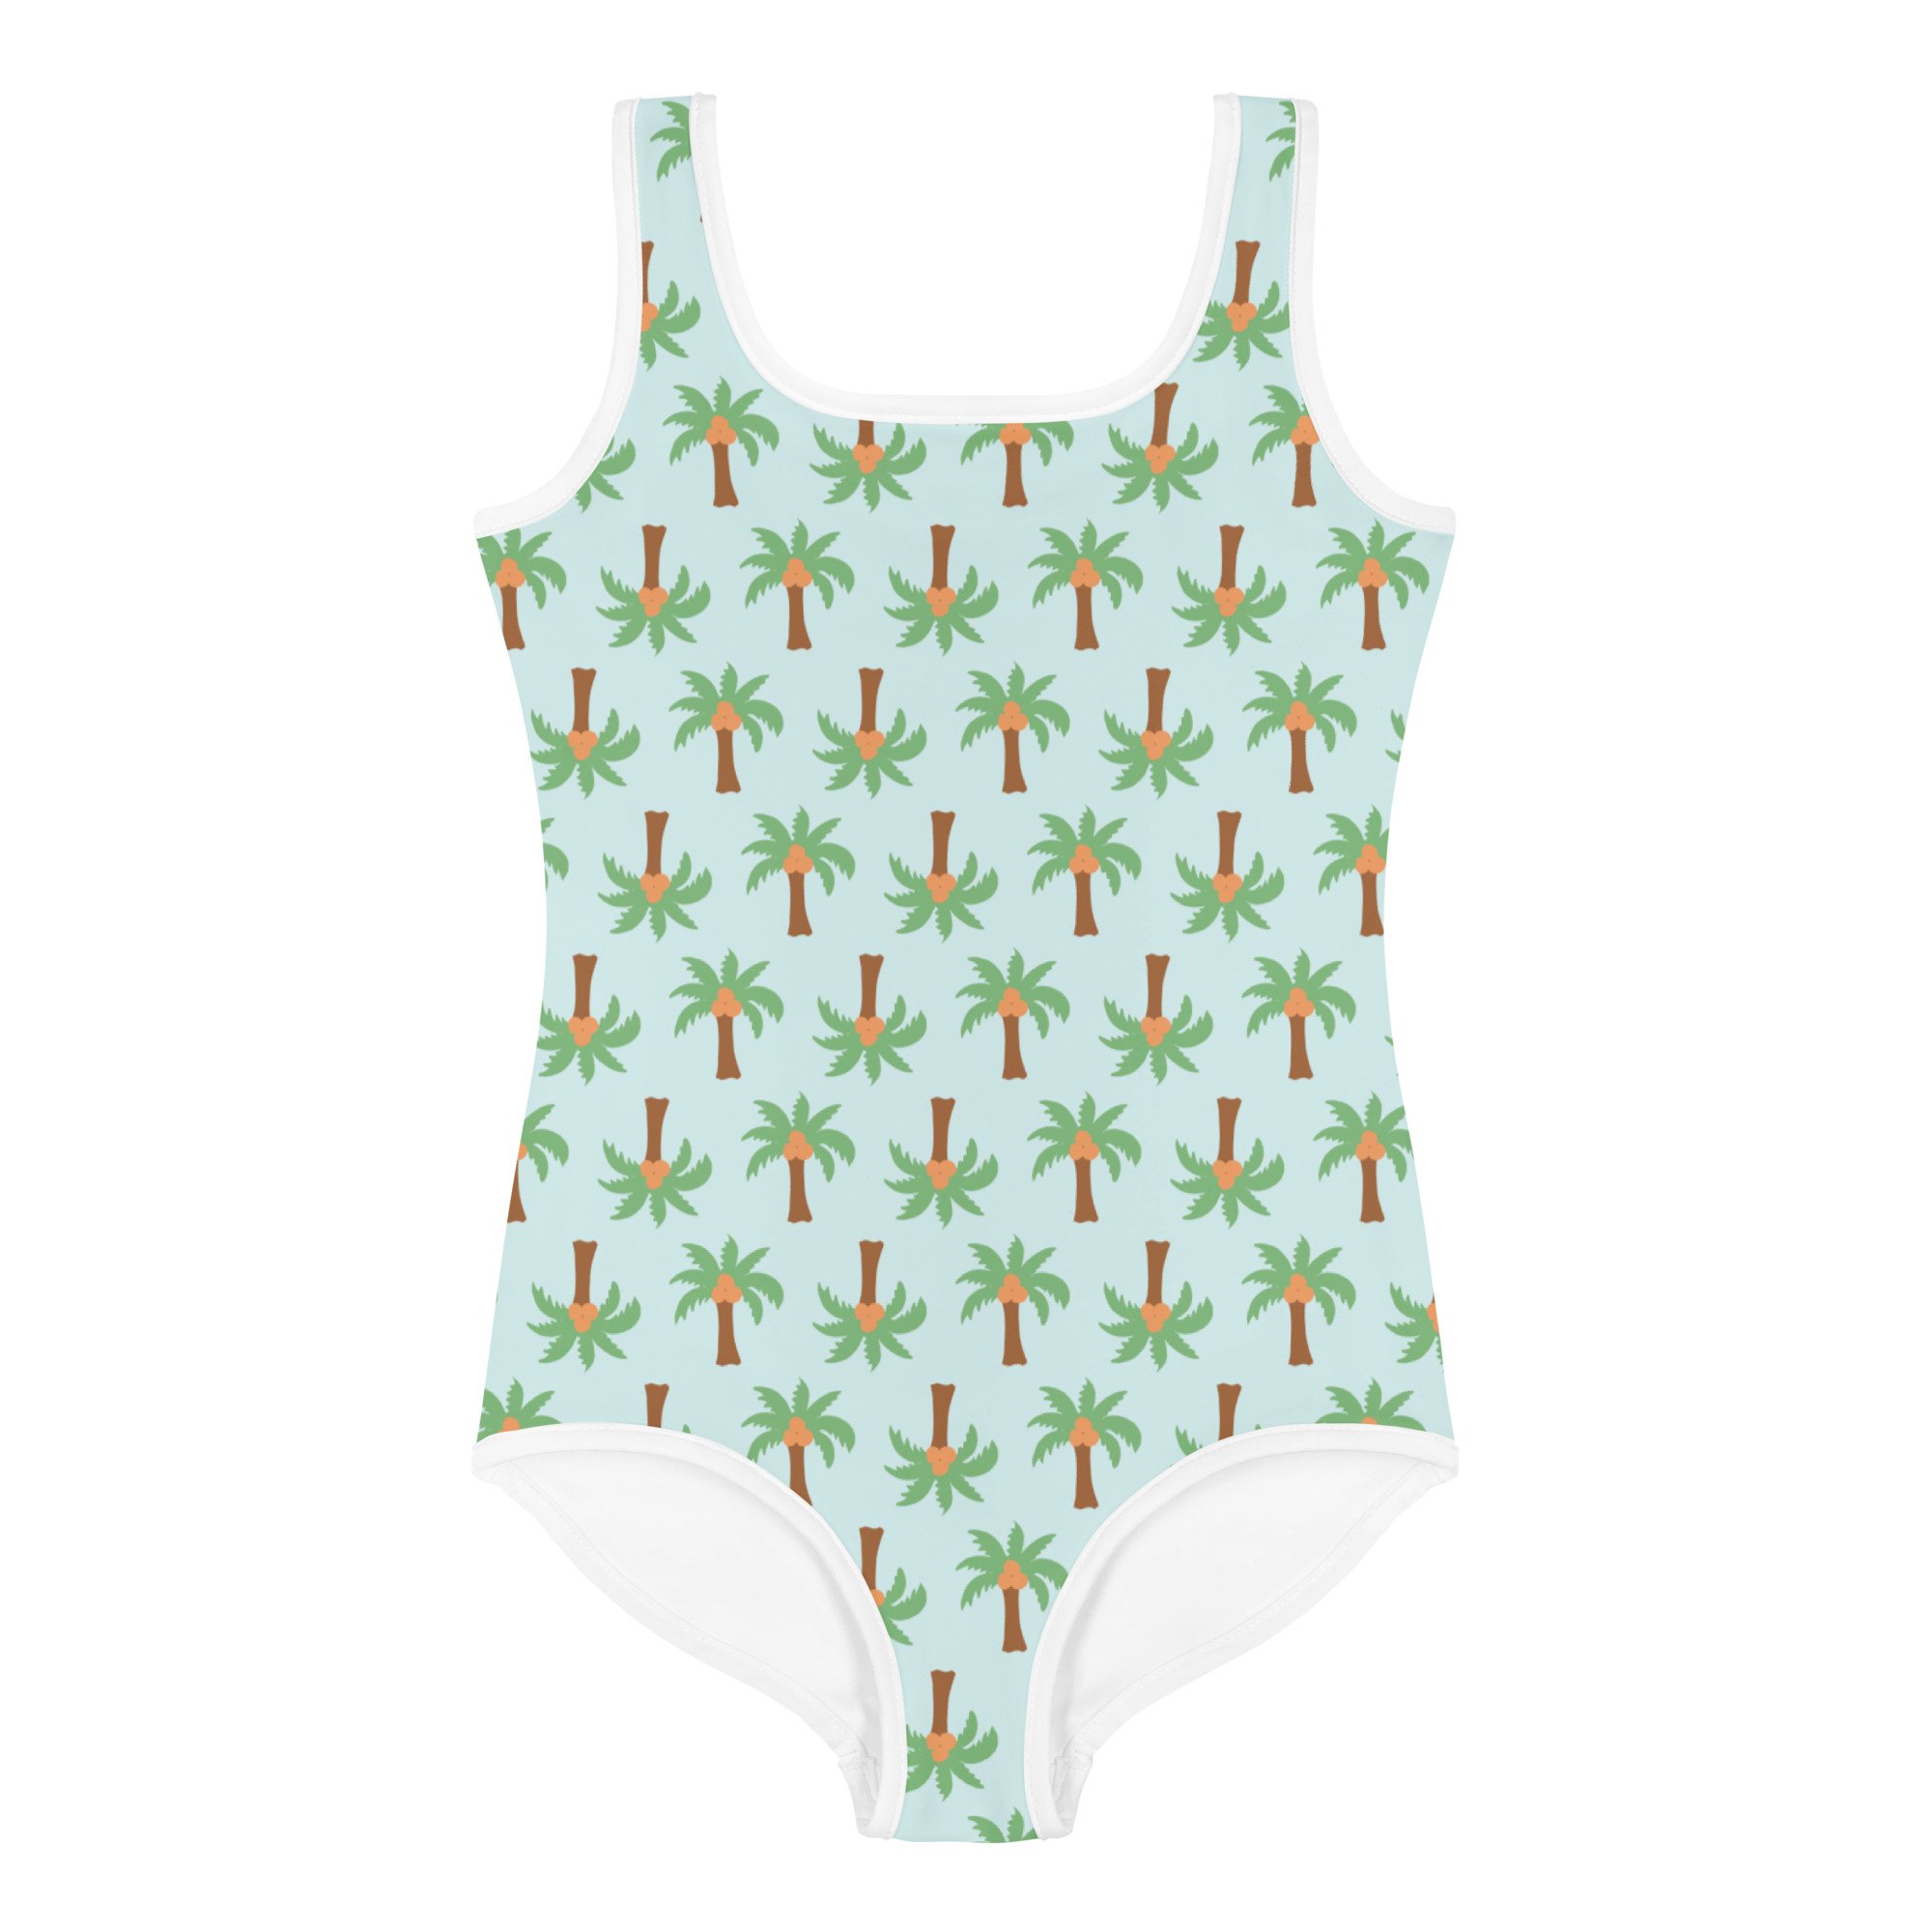 all-over-print-kids-swimsuit-white-front-65a5f5f17c6c8.jpg